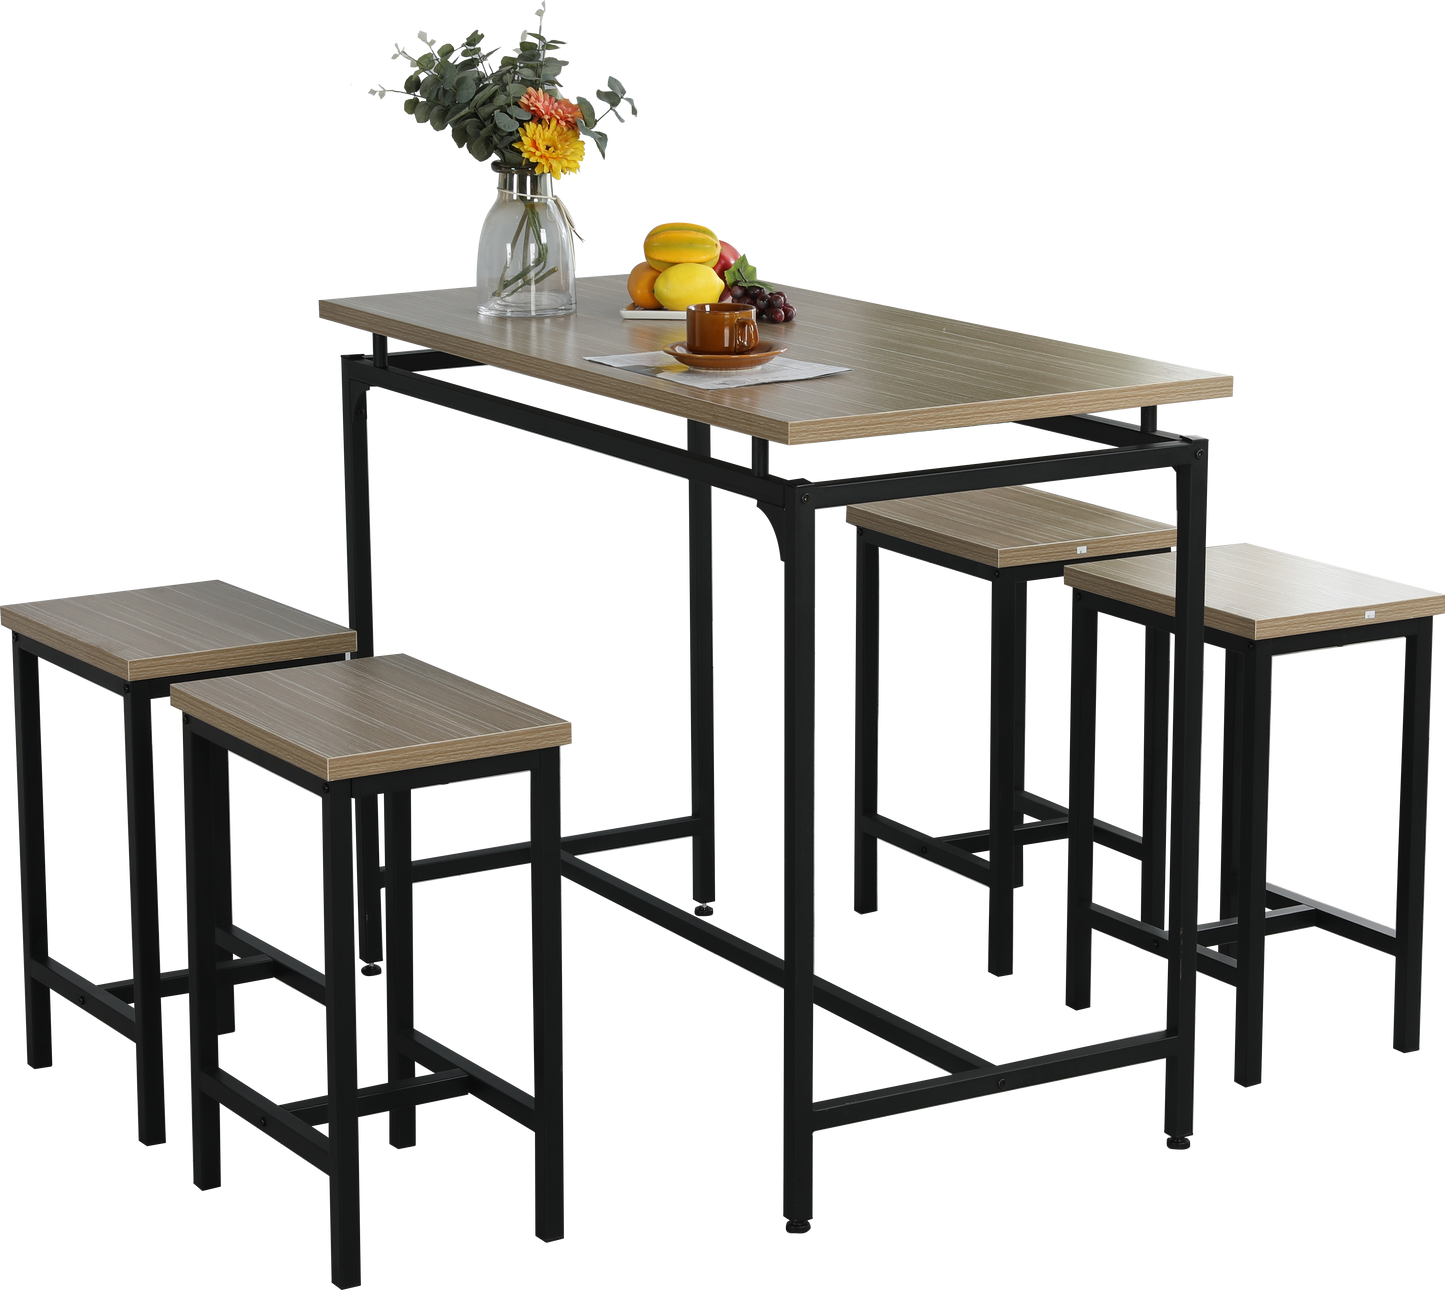 BTMWAY Dining Table Set for 4, A135